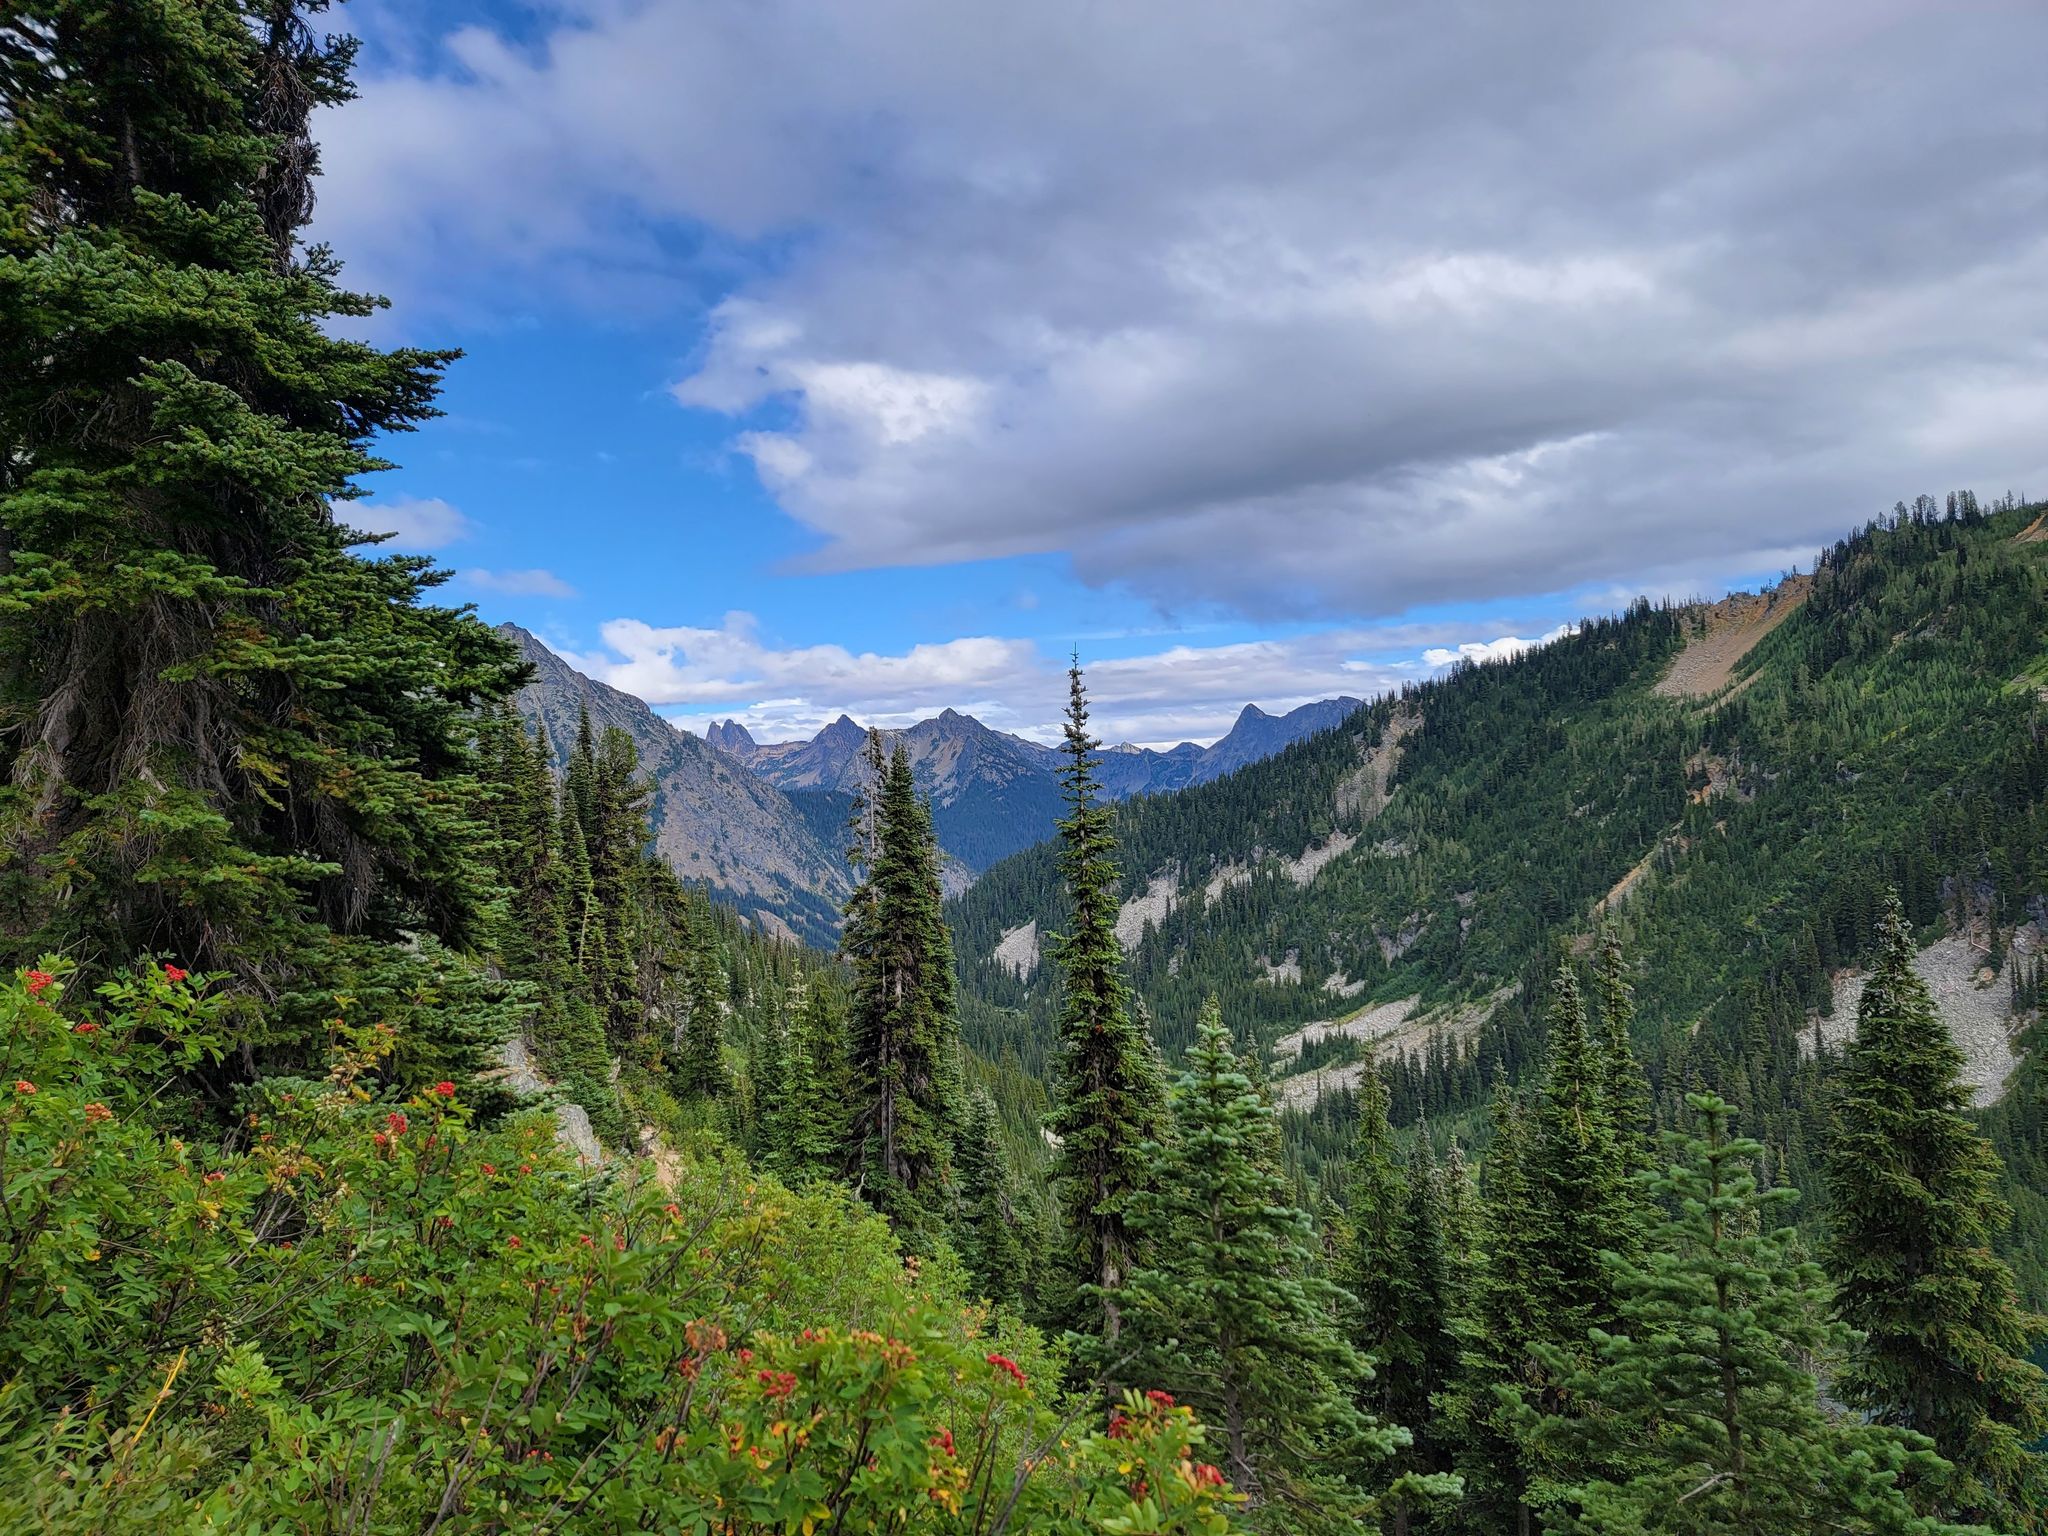 Maple Pass Trail is one of the best hikes in the North Cascades